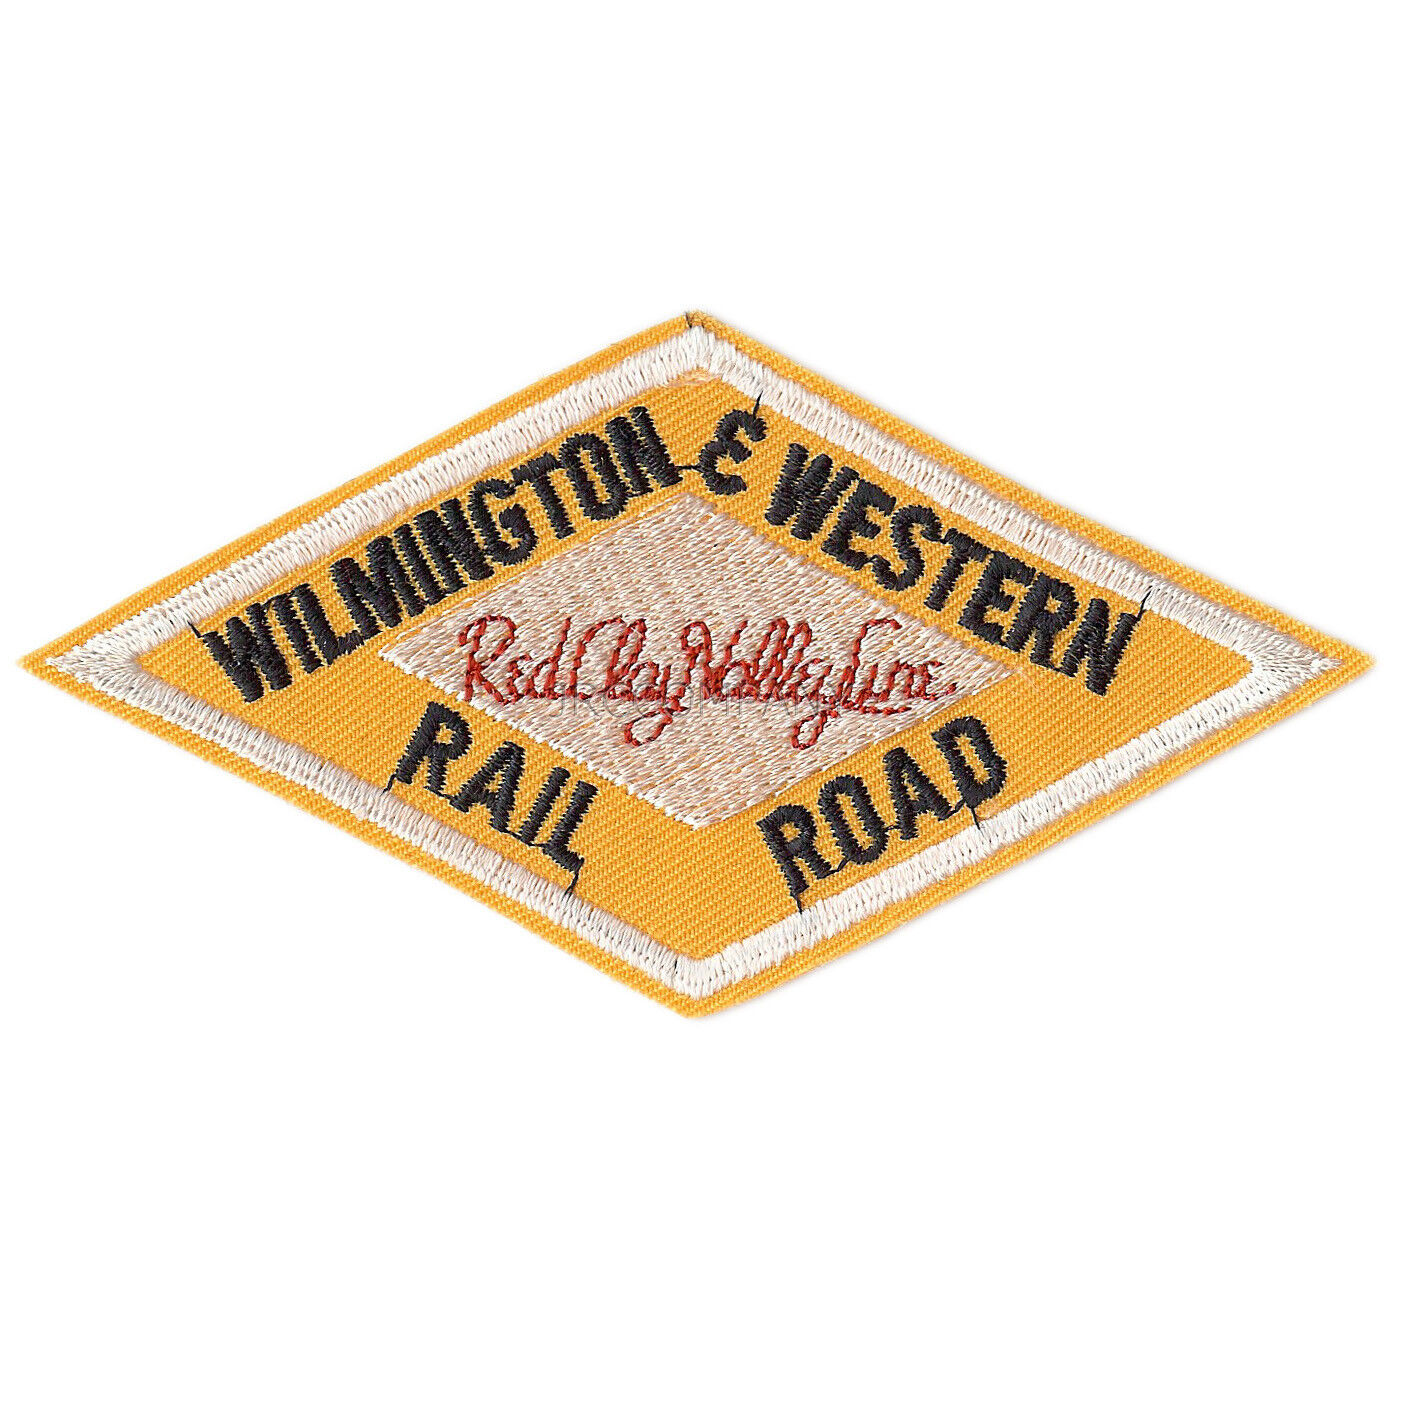 Patch- Wilmington and Western Railroad (WWRC) # 11679 -NEW- 